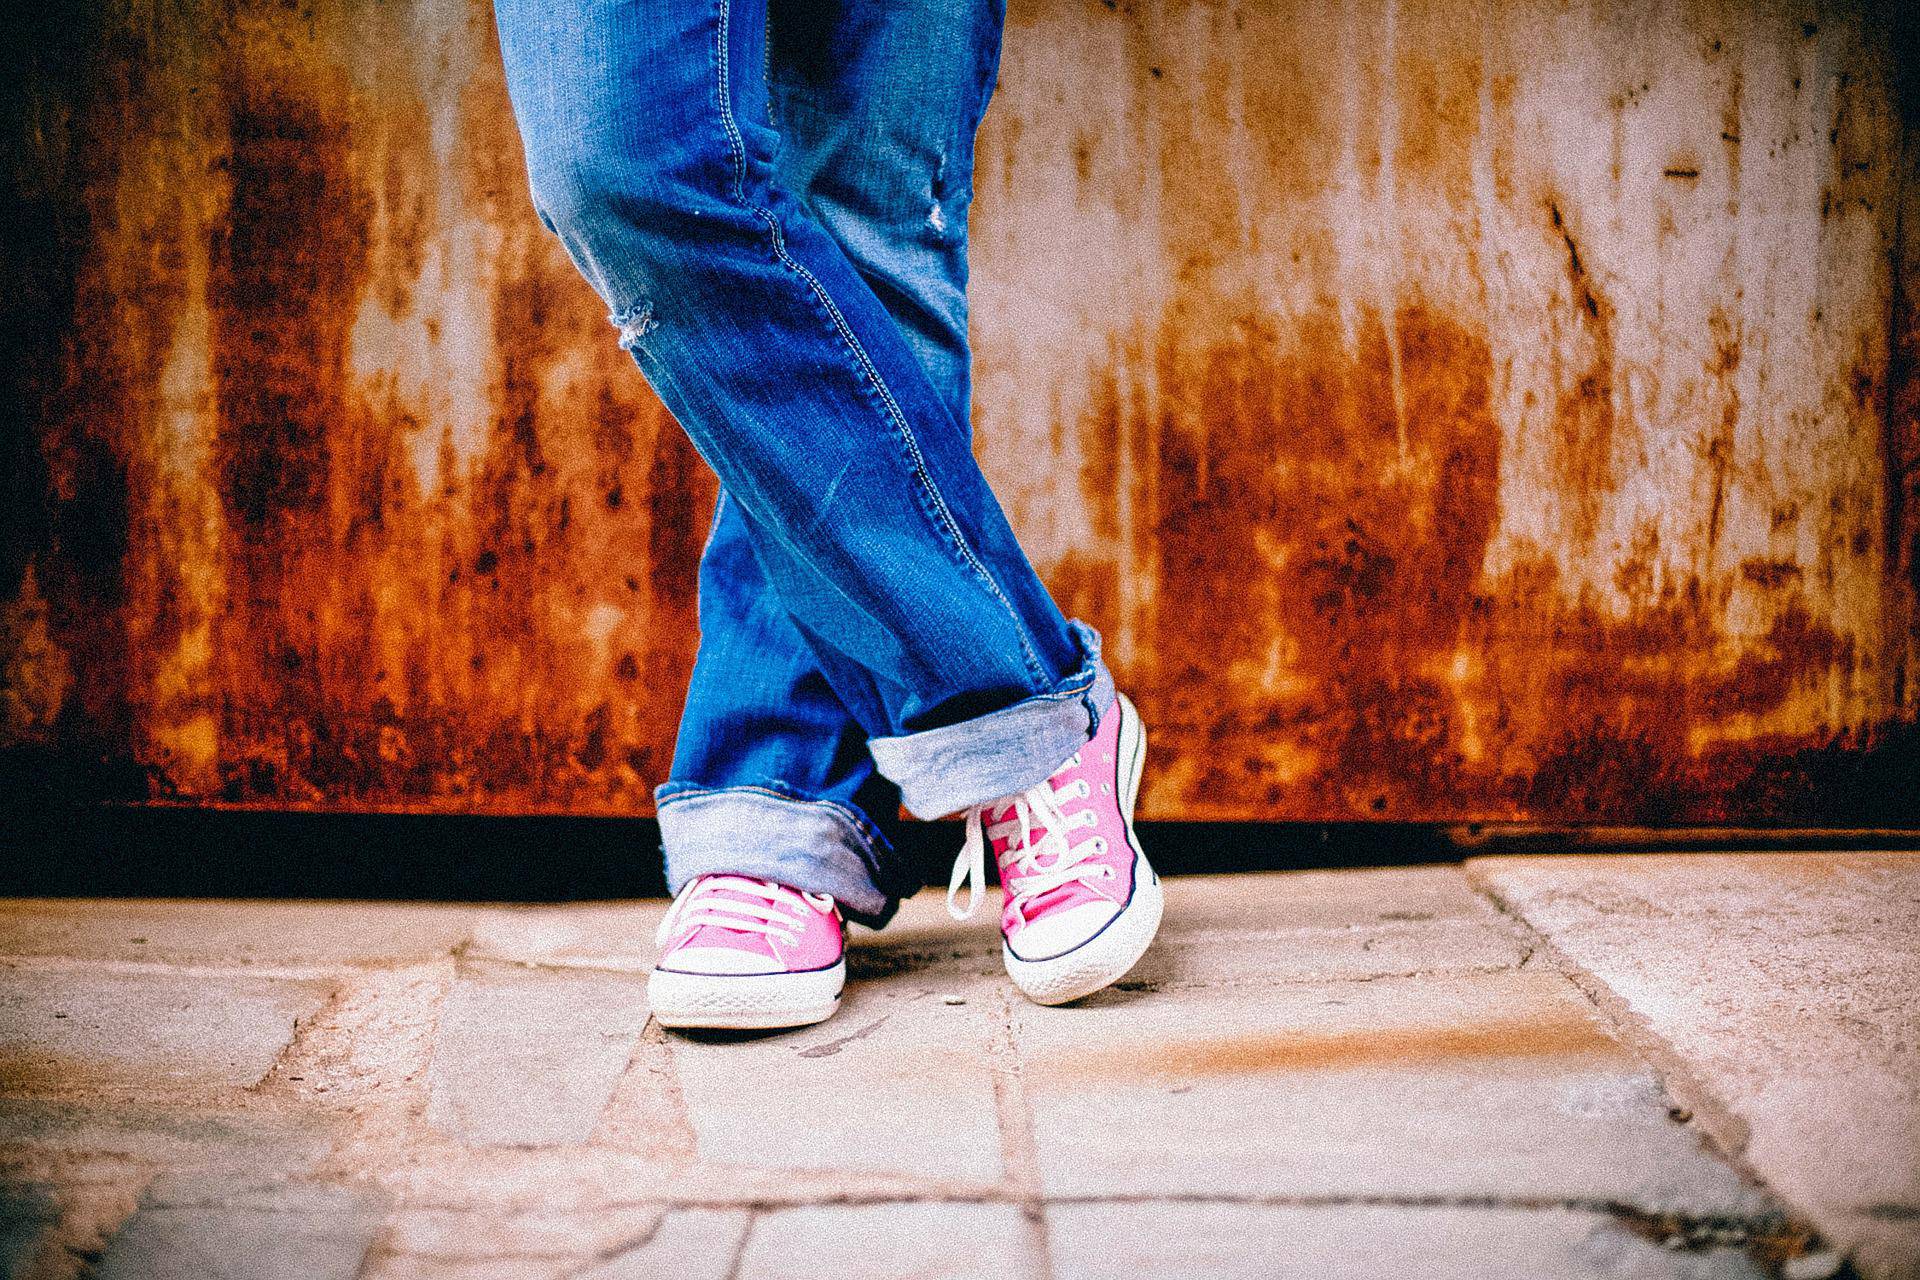 Picture of a young persons legs and feet wearing jeans and trainers